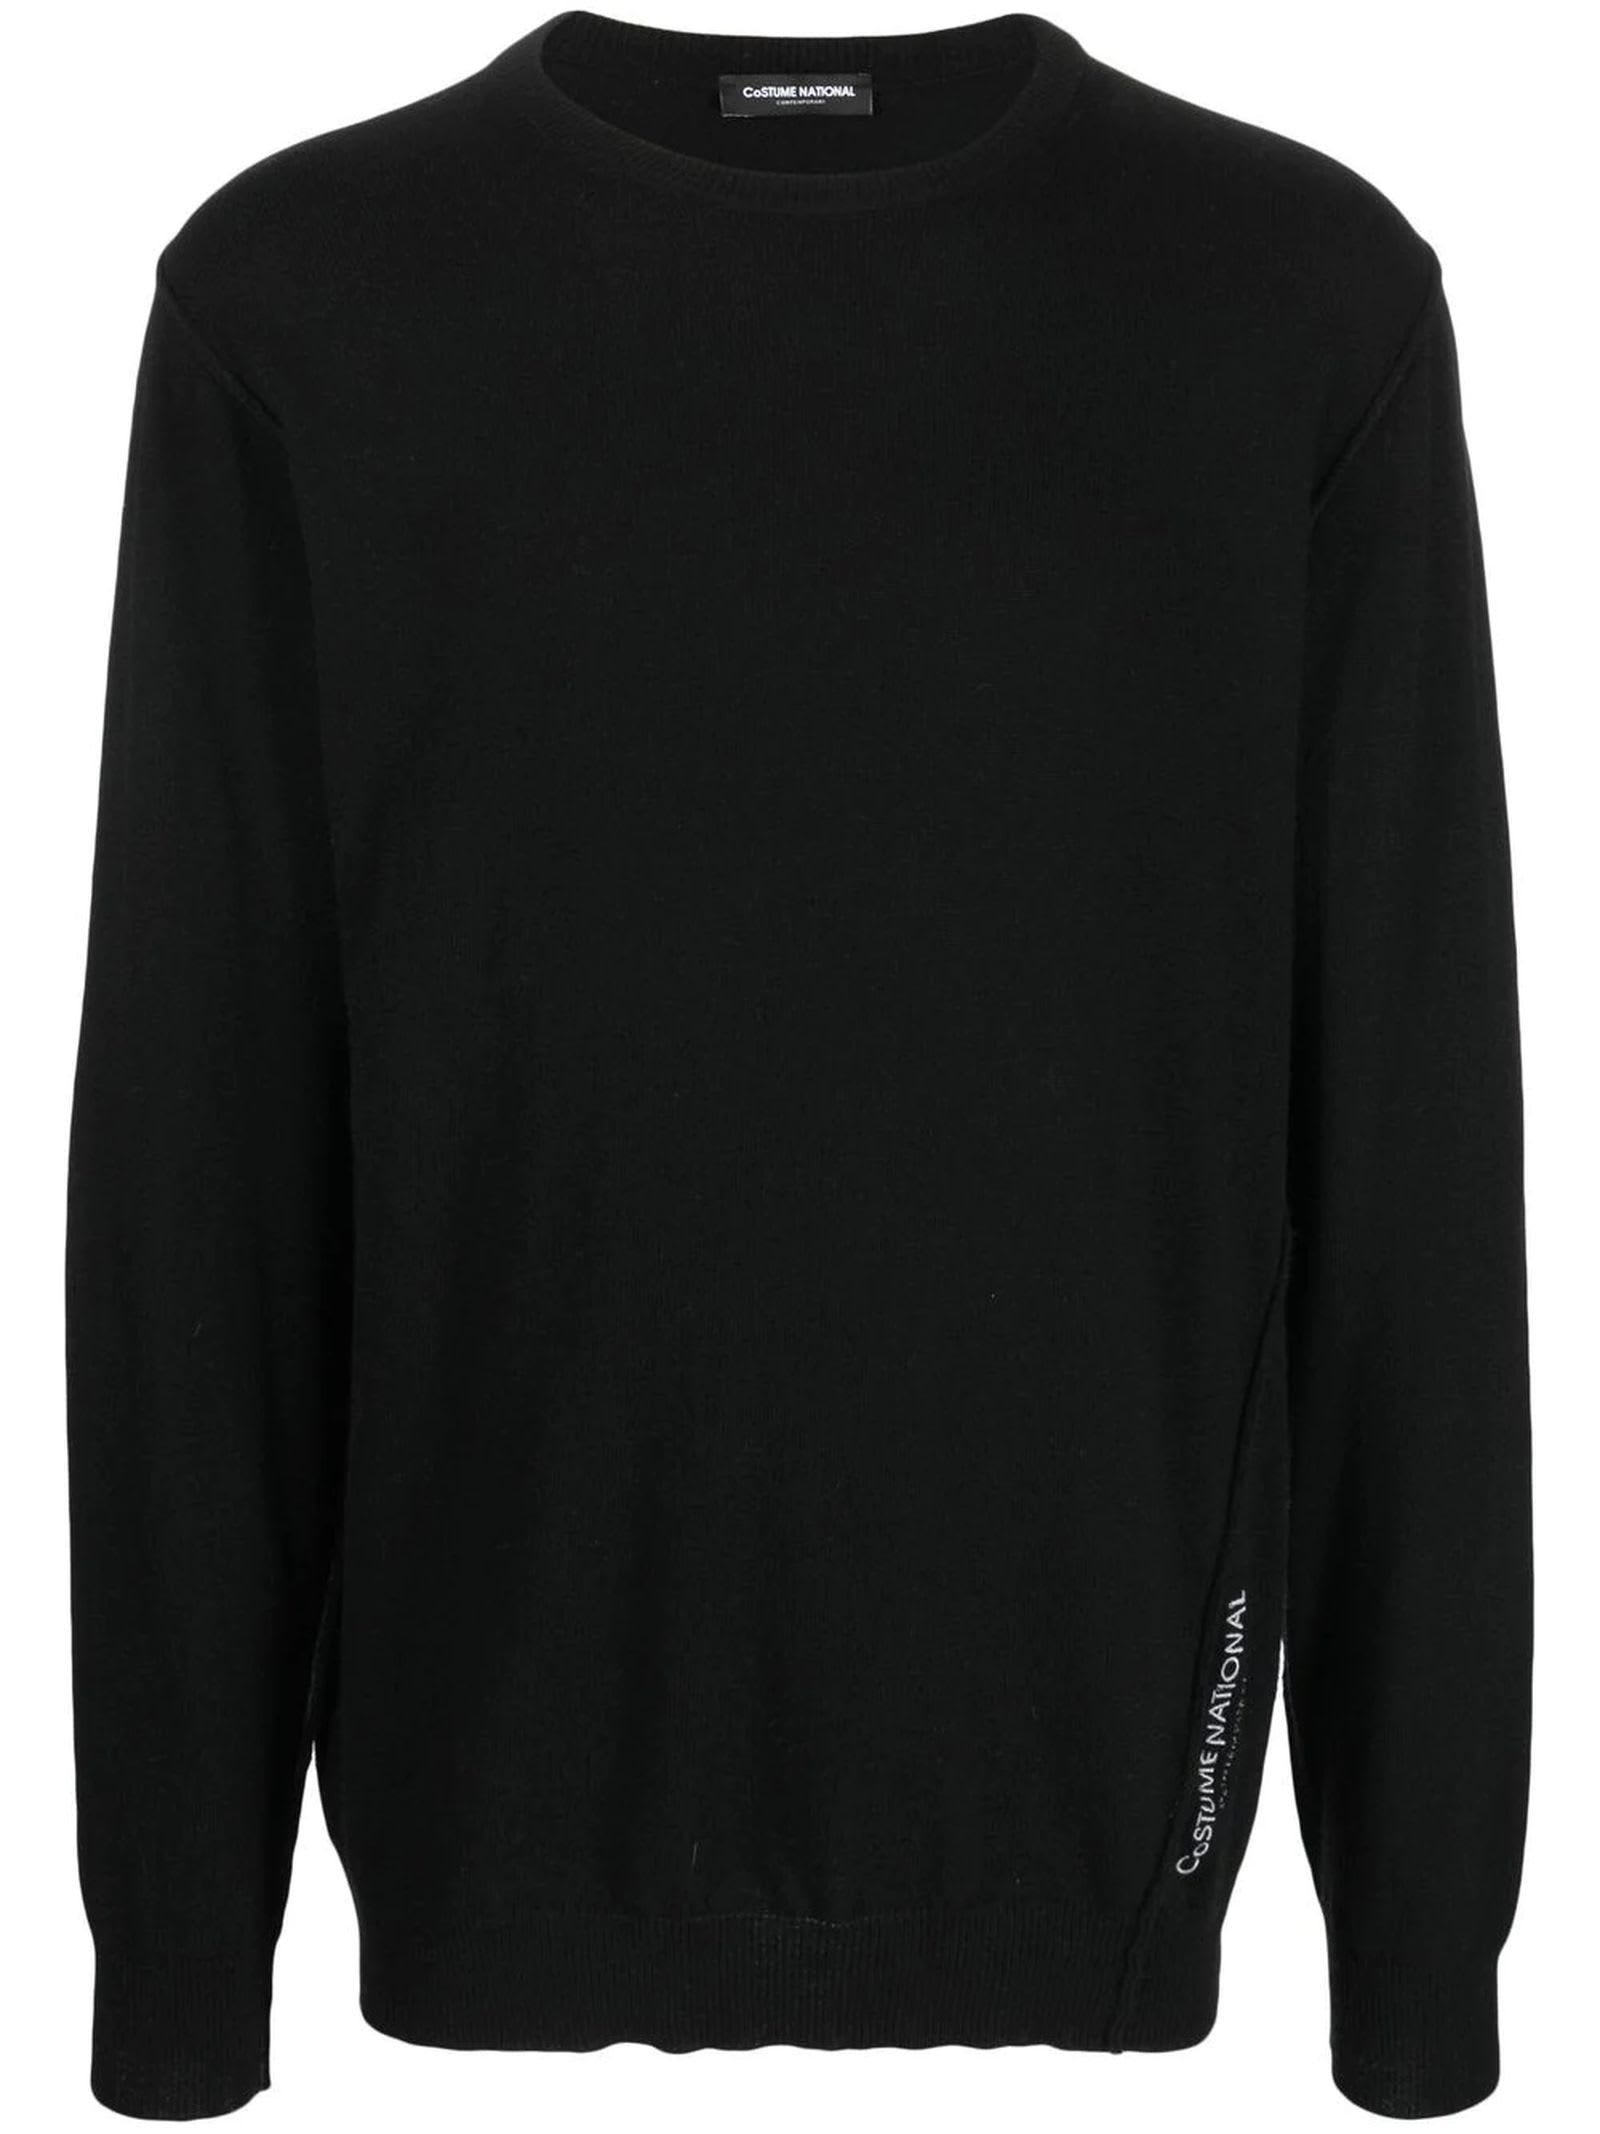 CoSTUME NATIONAL CONTEMPORARY Black Wool And Cashmere Jumper